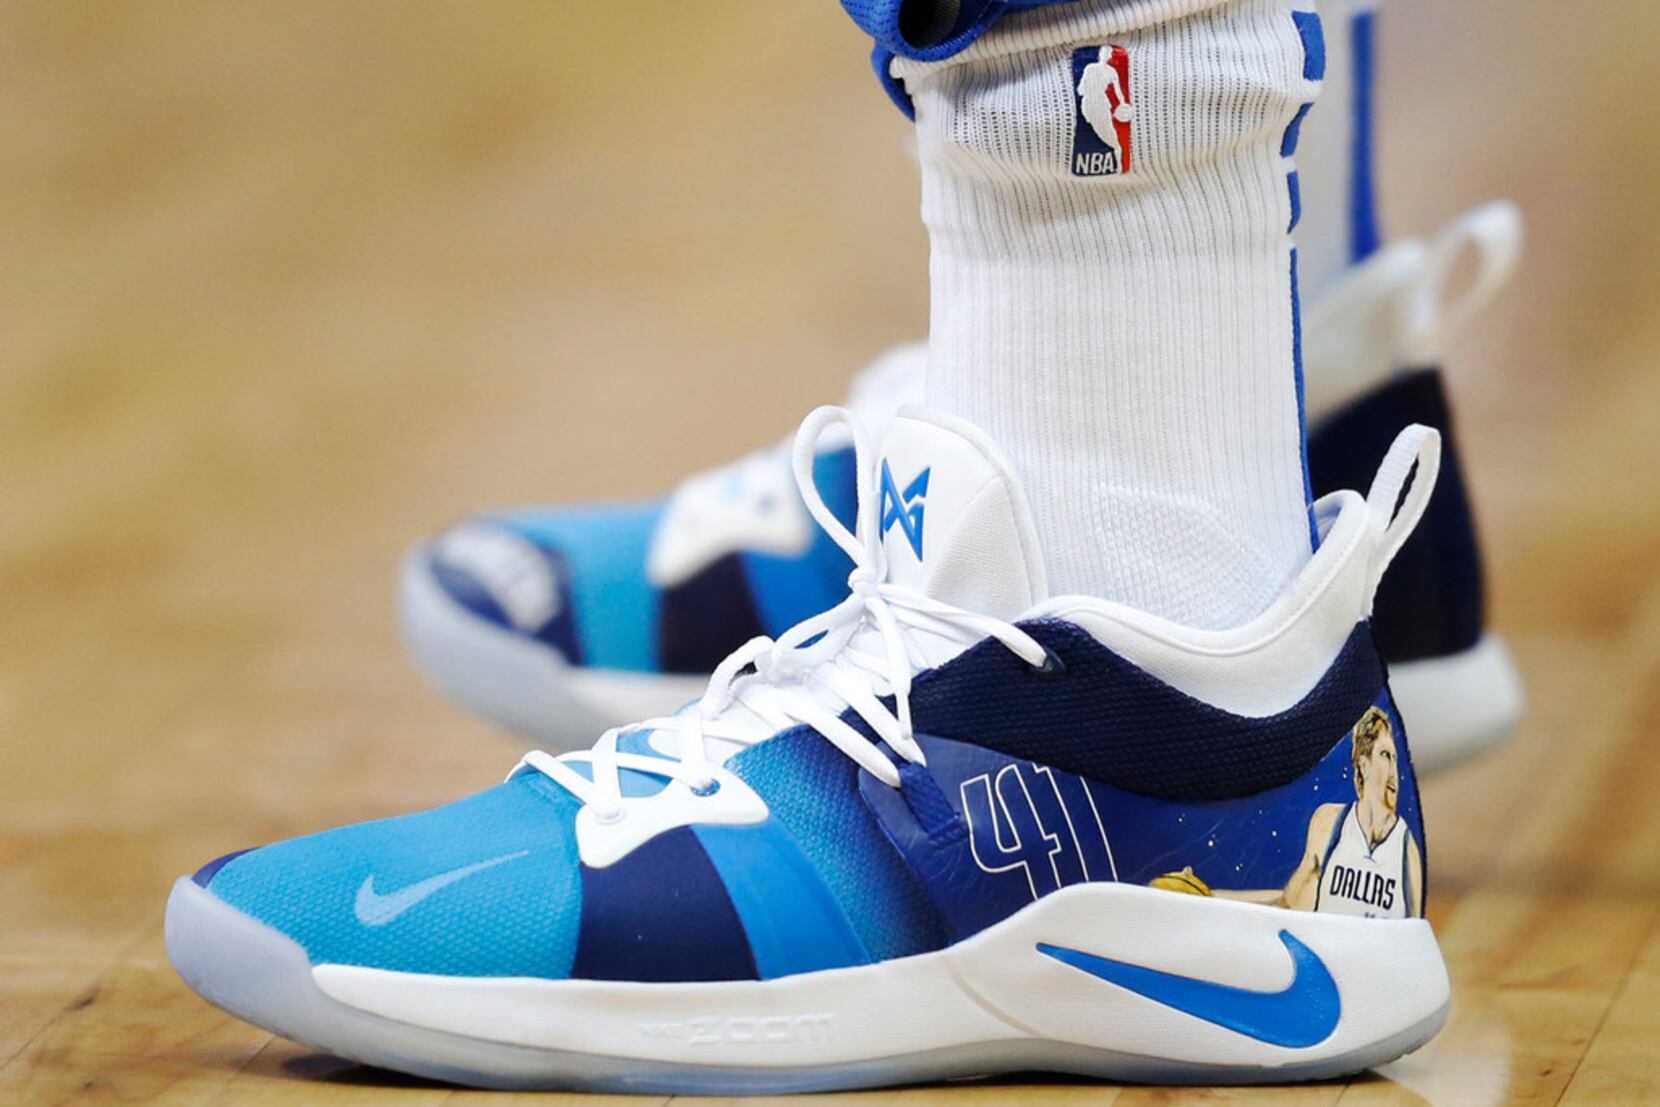 You Can Make Custom Nike Shoes for All 30 NBA Teams Right Now